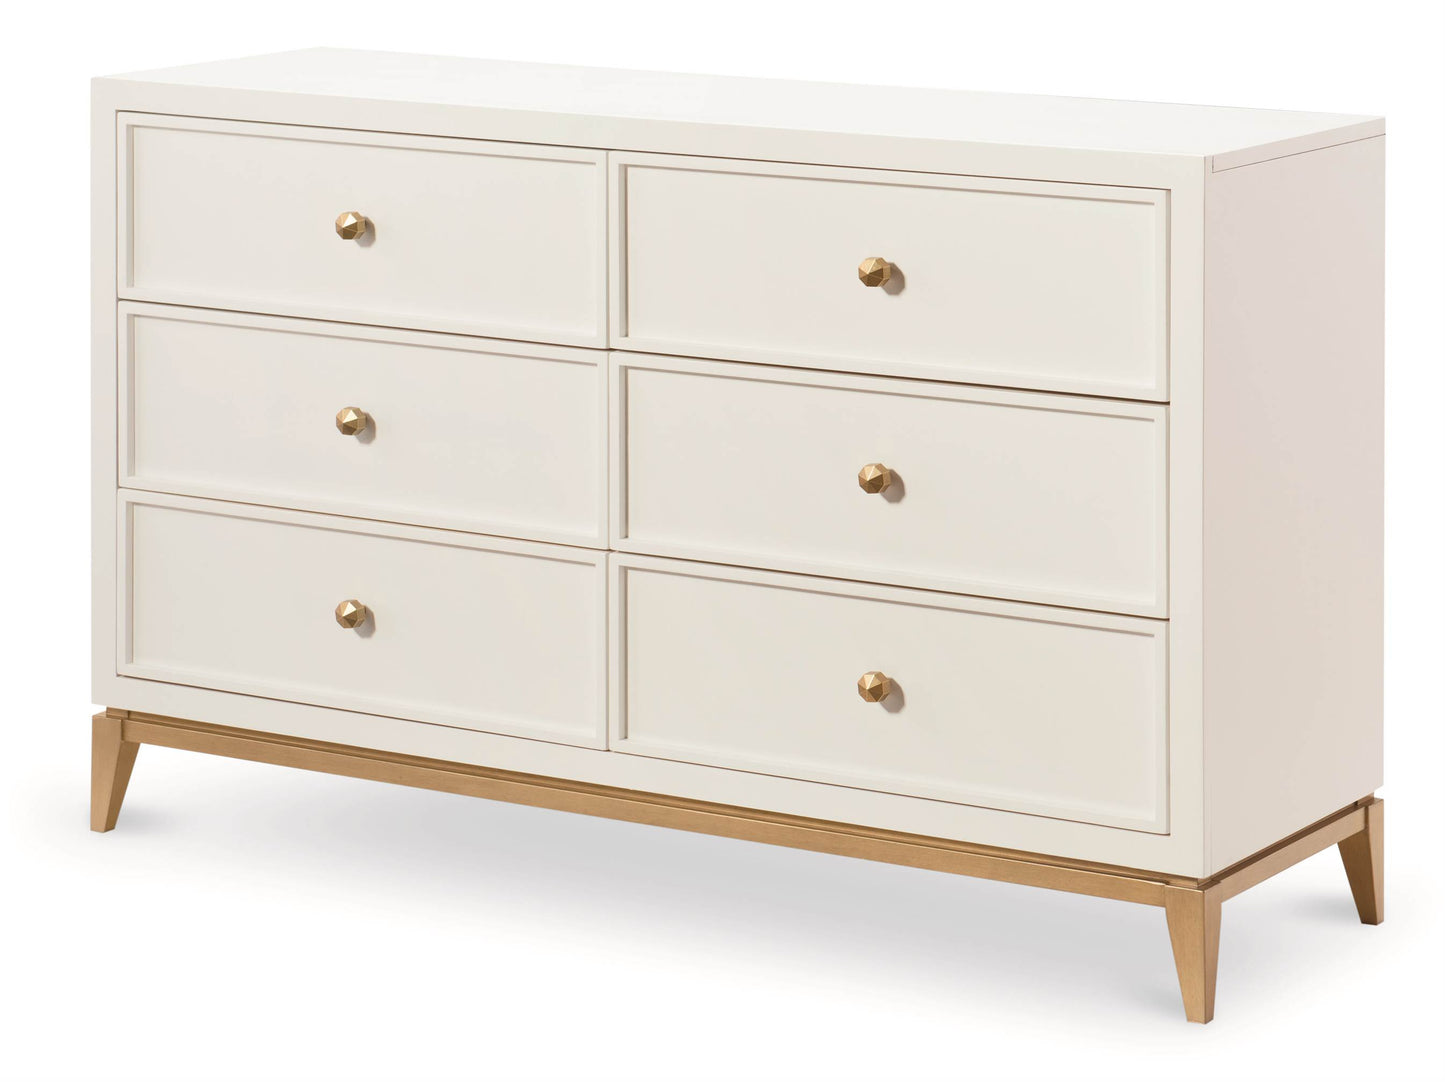 Chelsea by Rachael Ray 6 Drawers Dresser